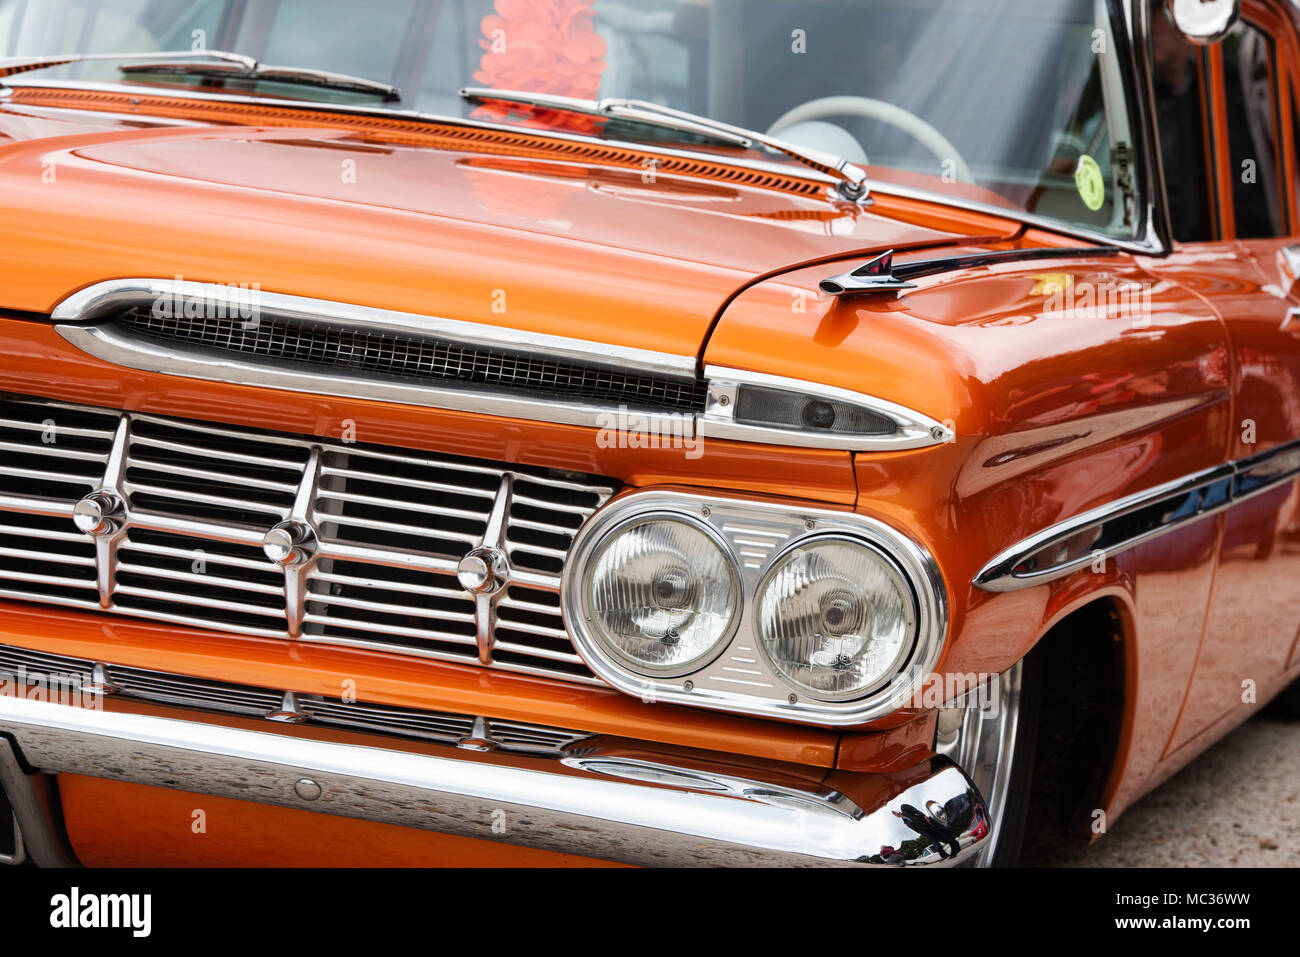 1959 Chevrolet parkwood station wagon at an american car show. UK Stock Photo